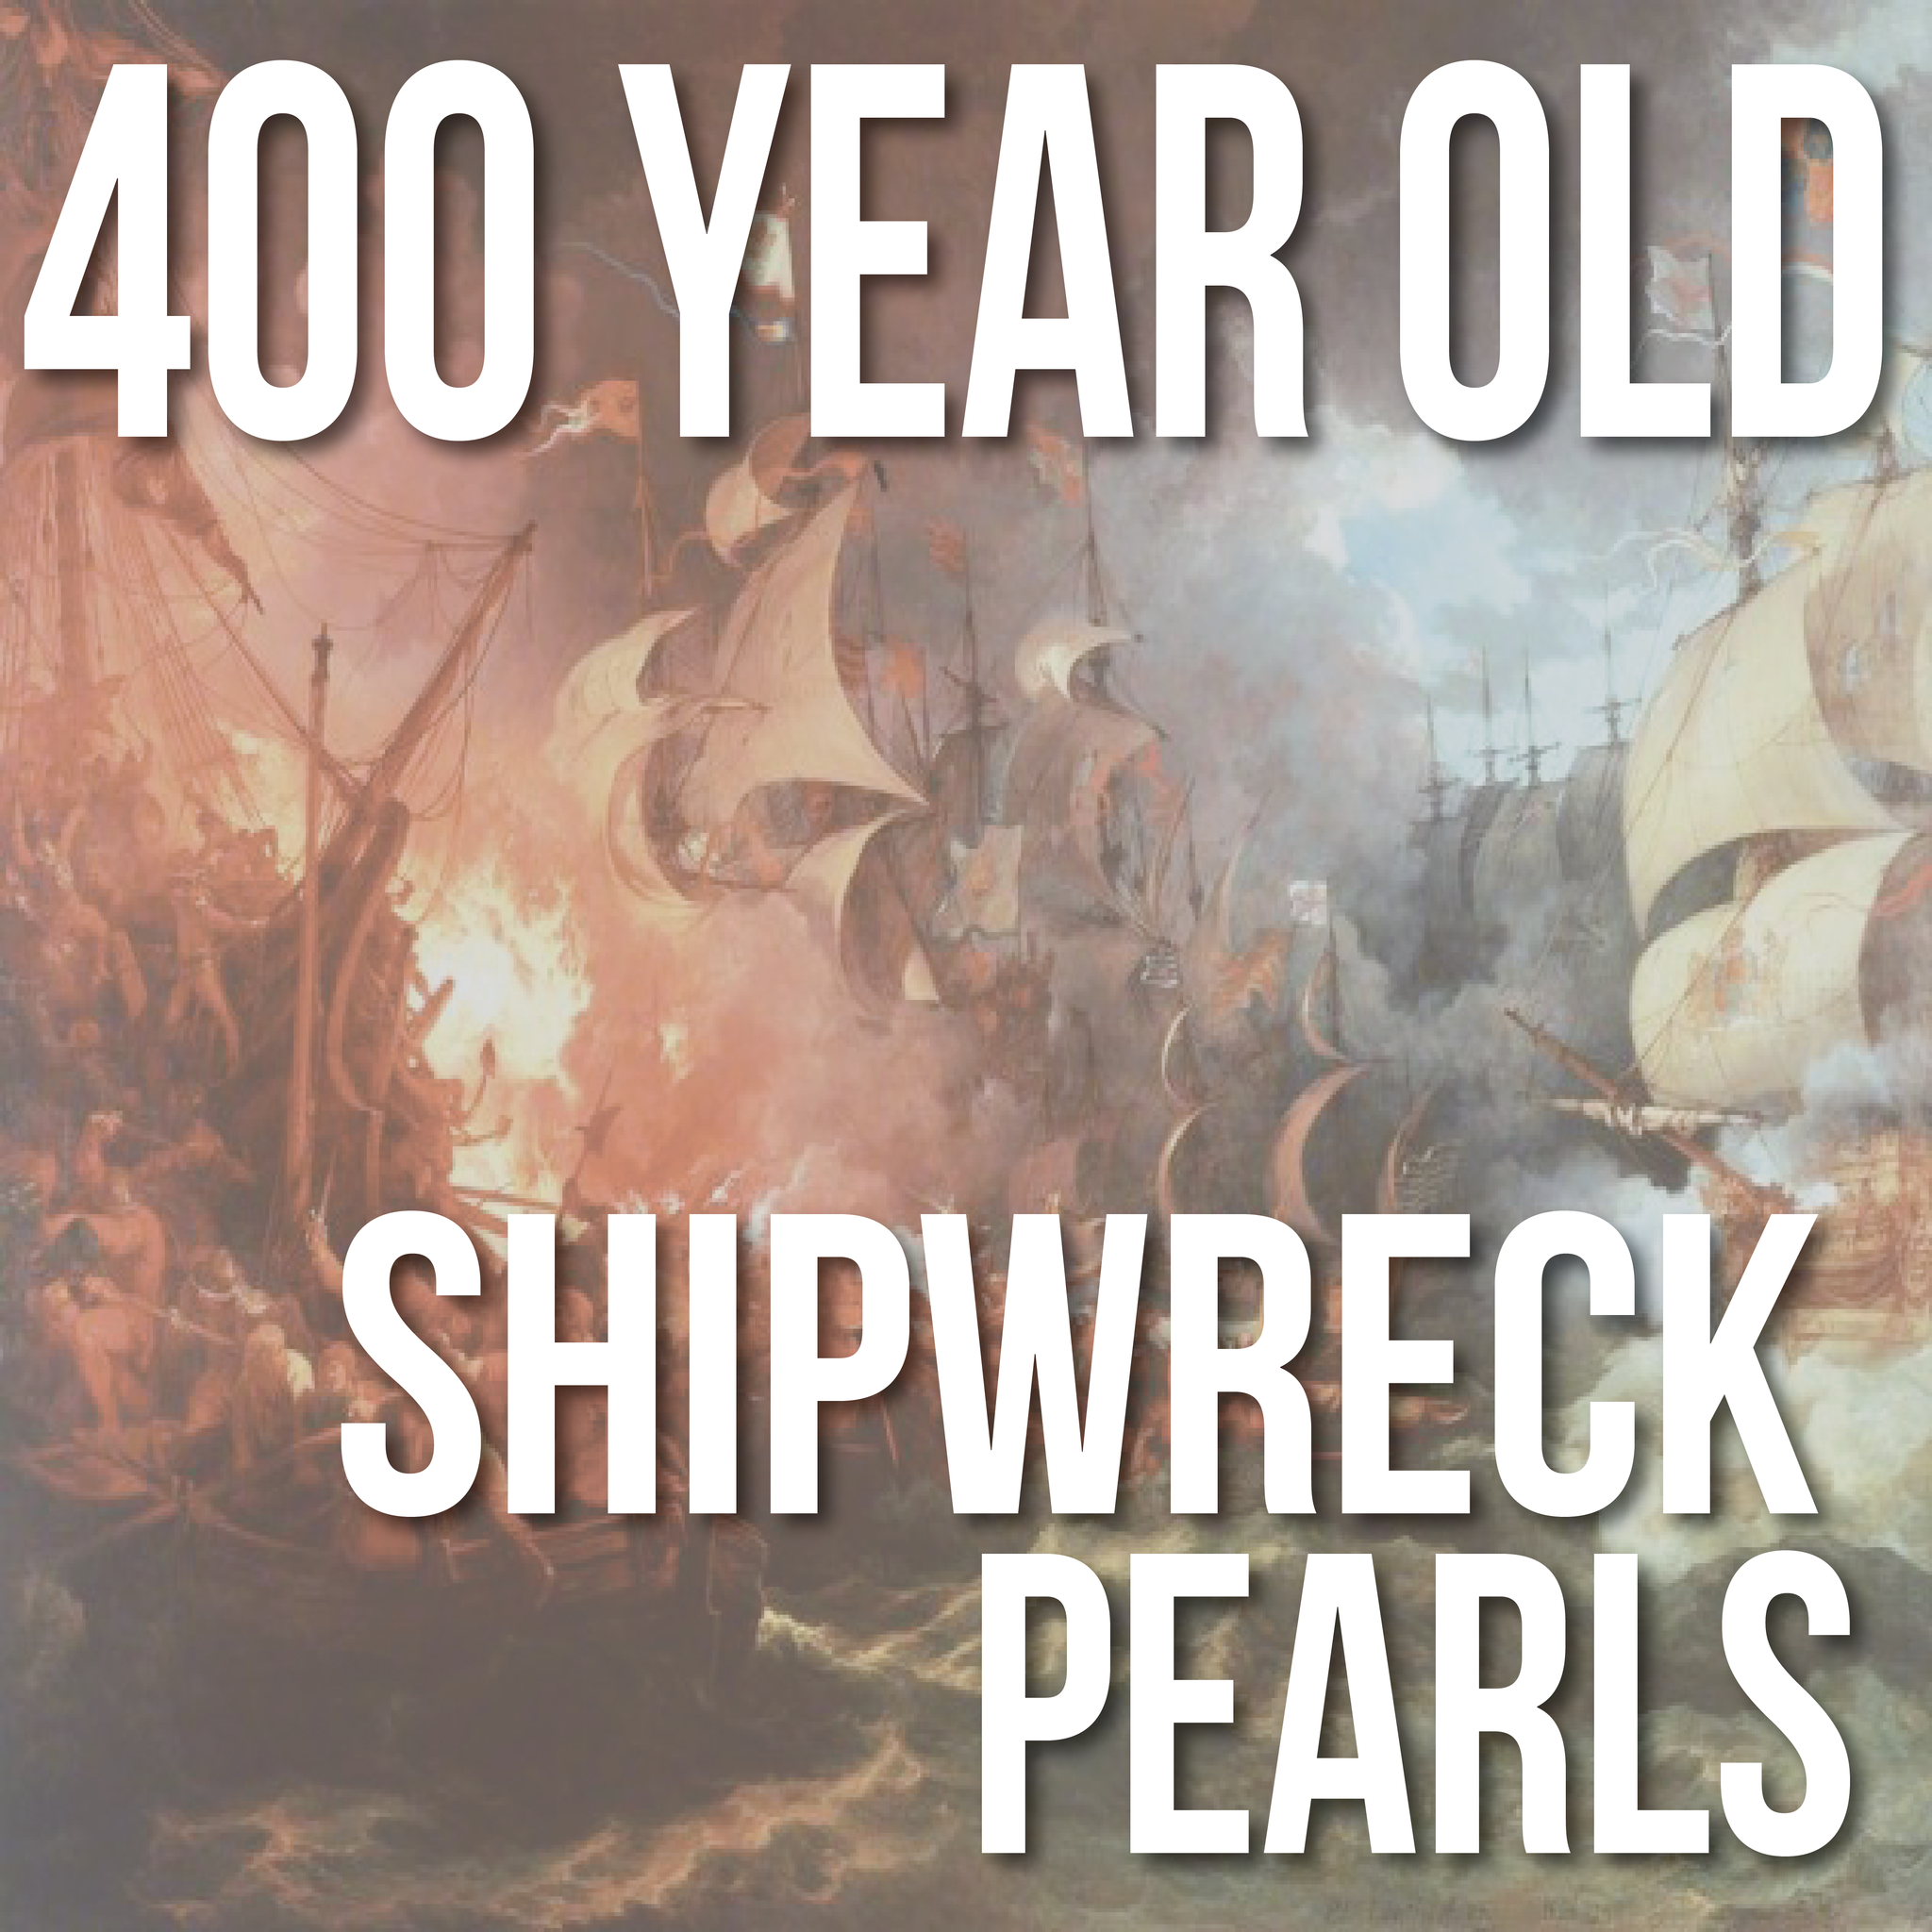 400 Year Old Shipwreck Pearls?